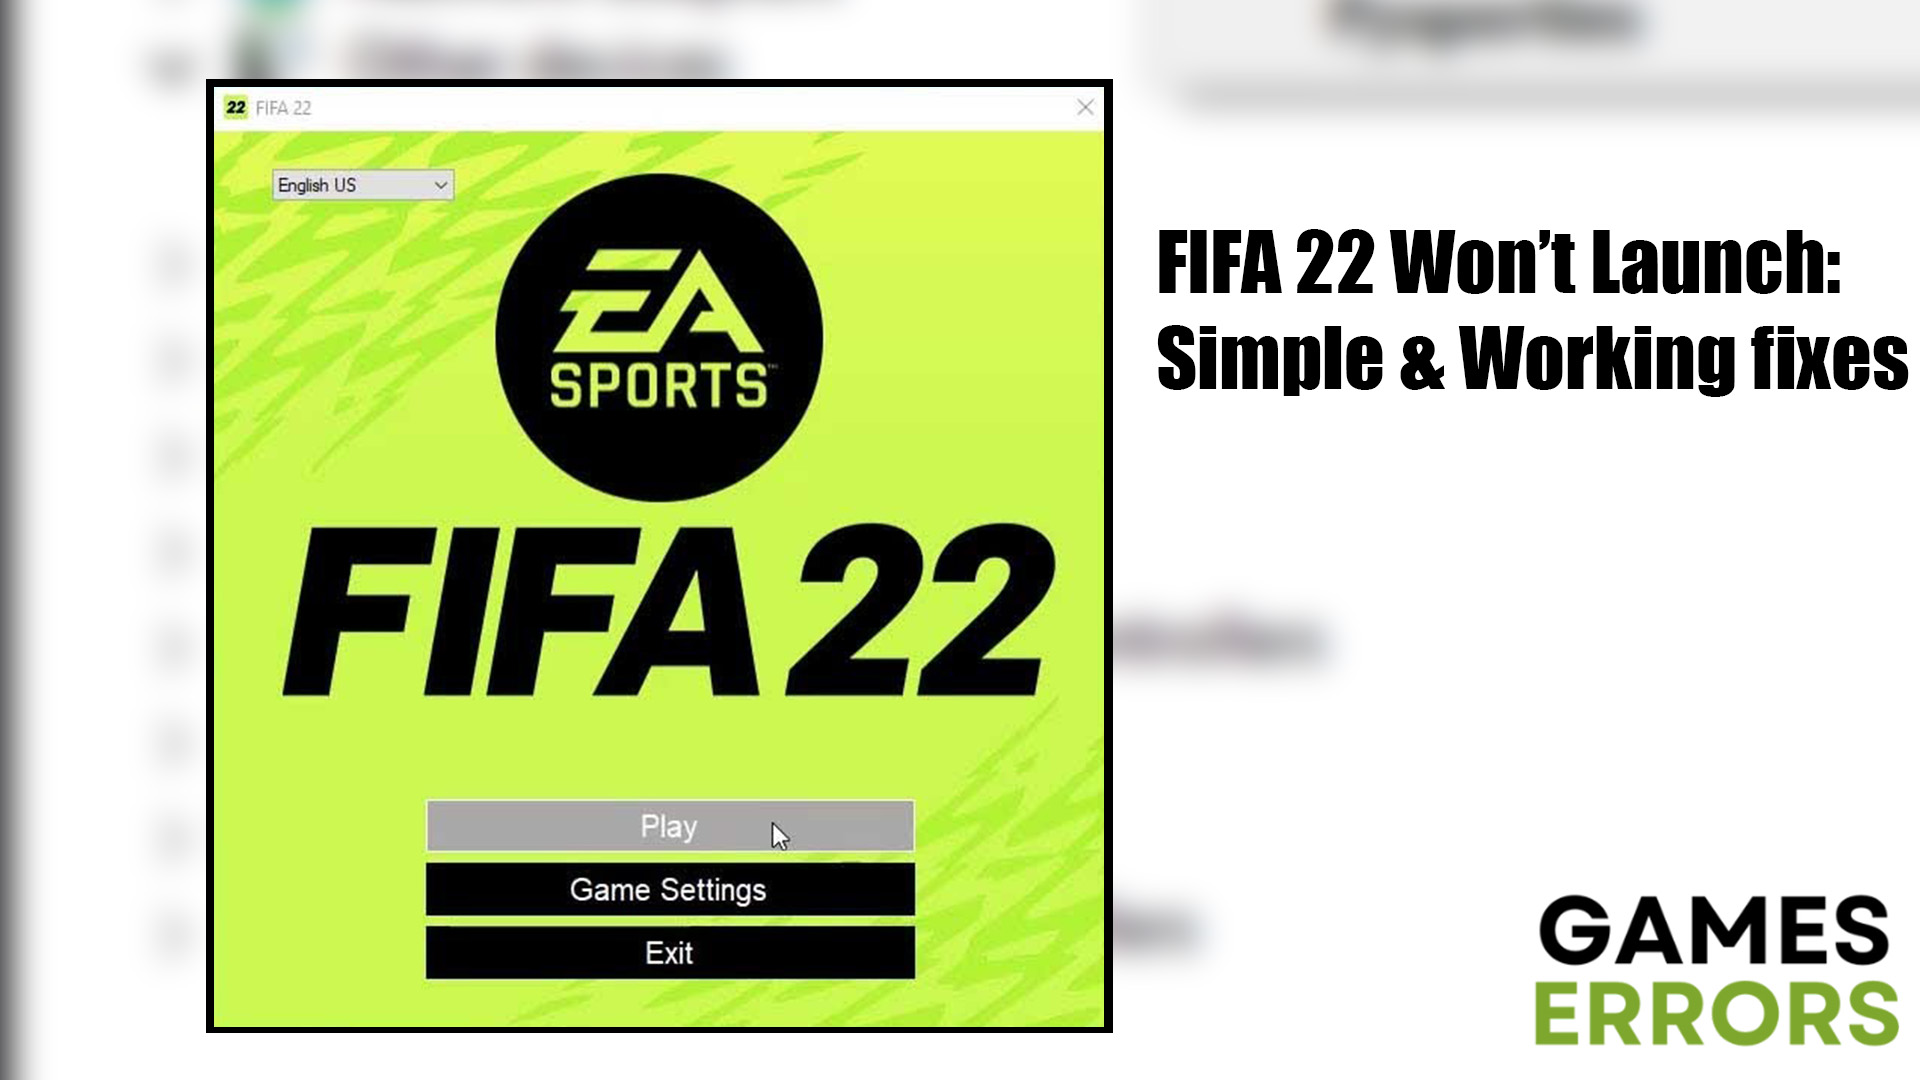 How to Fix FIFA 22 Not Launching on Windows 10? - MiniTool